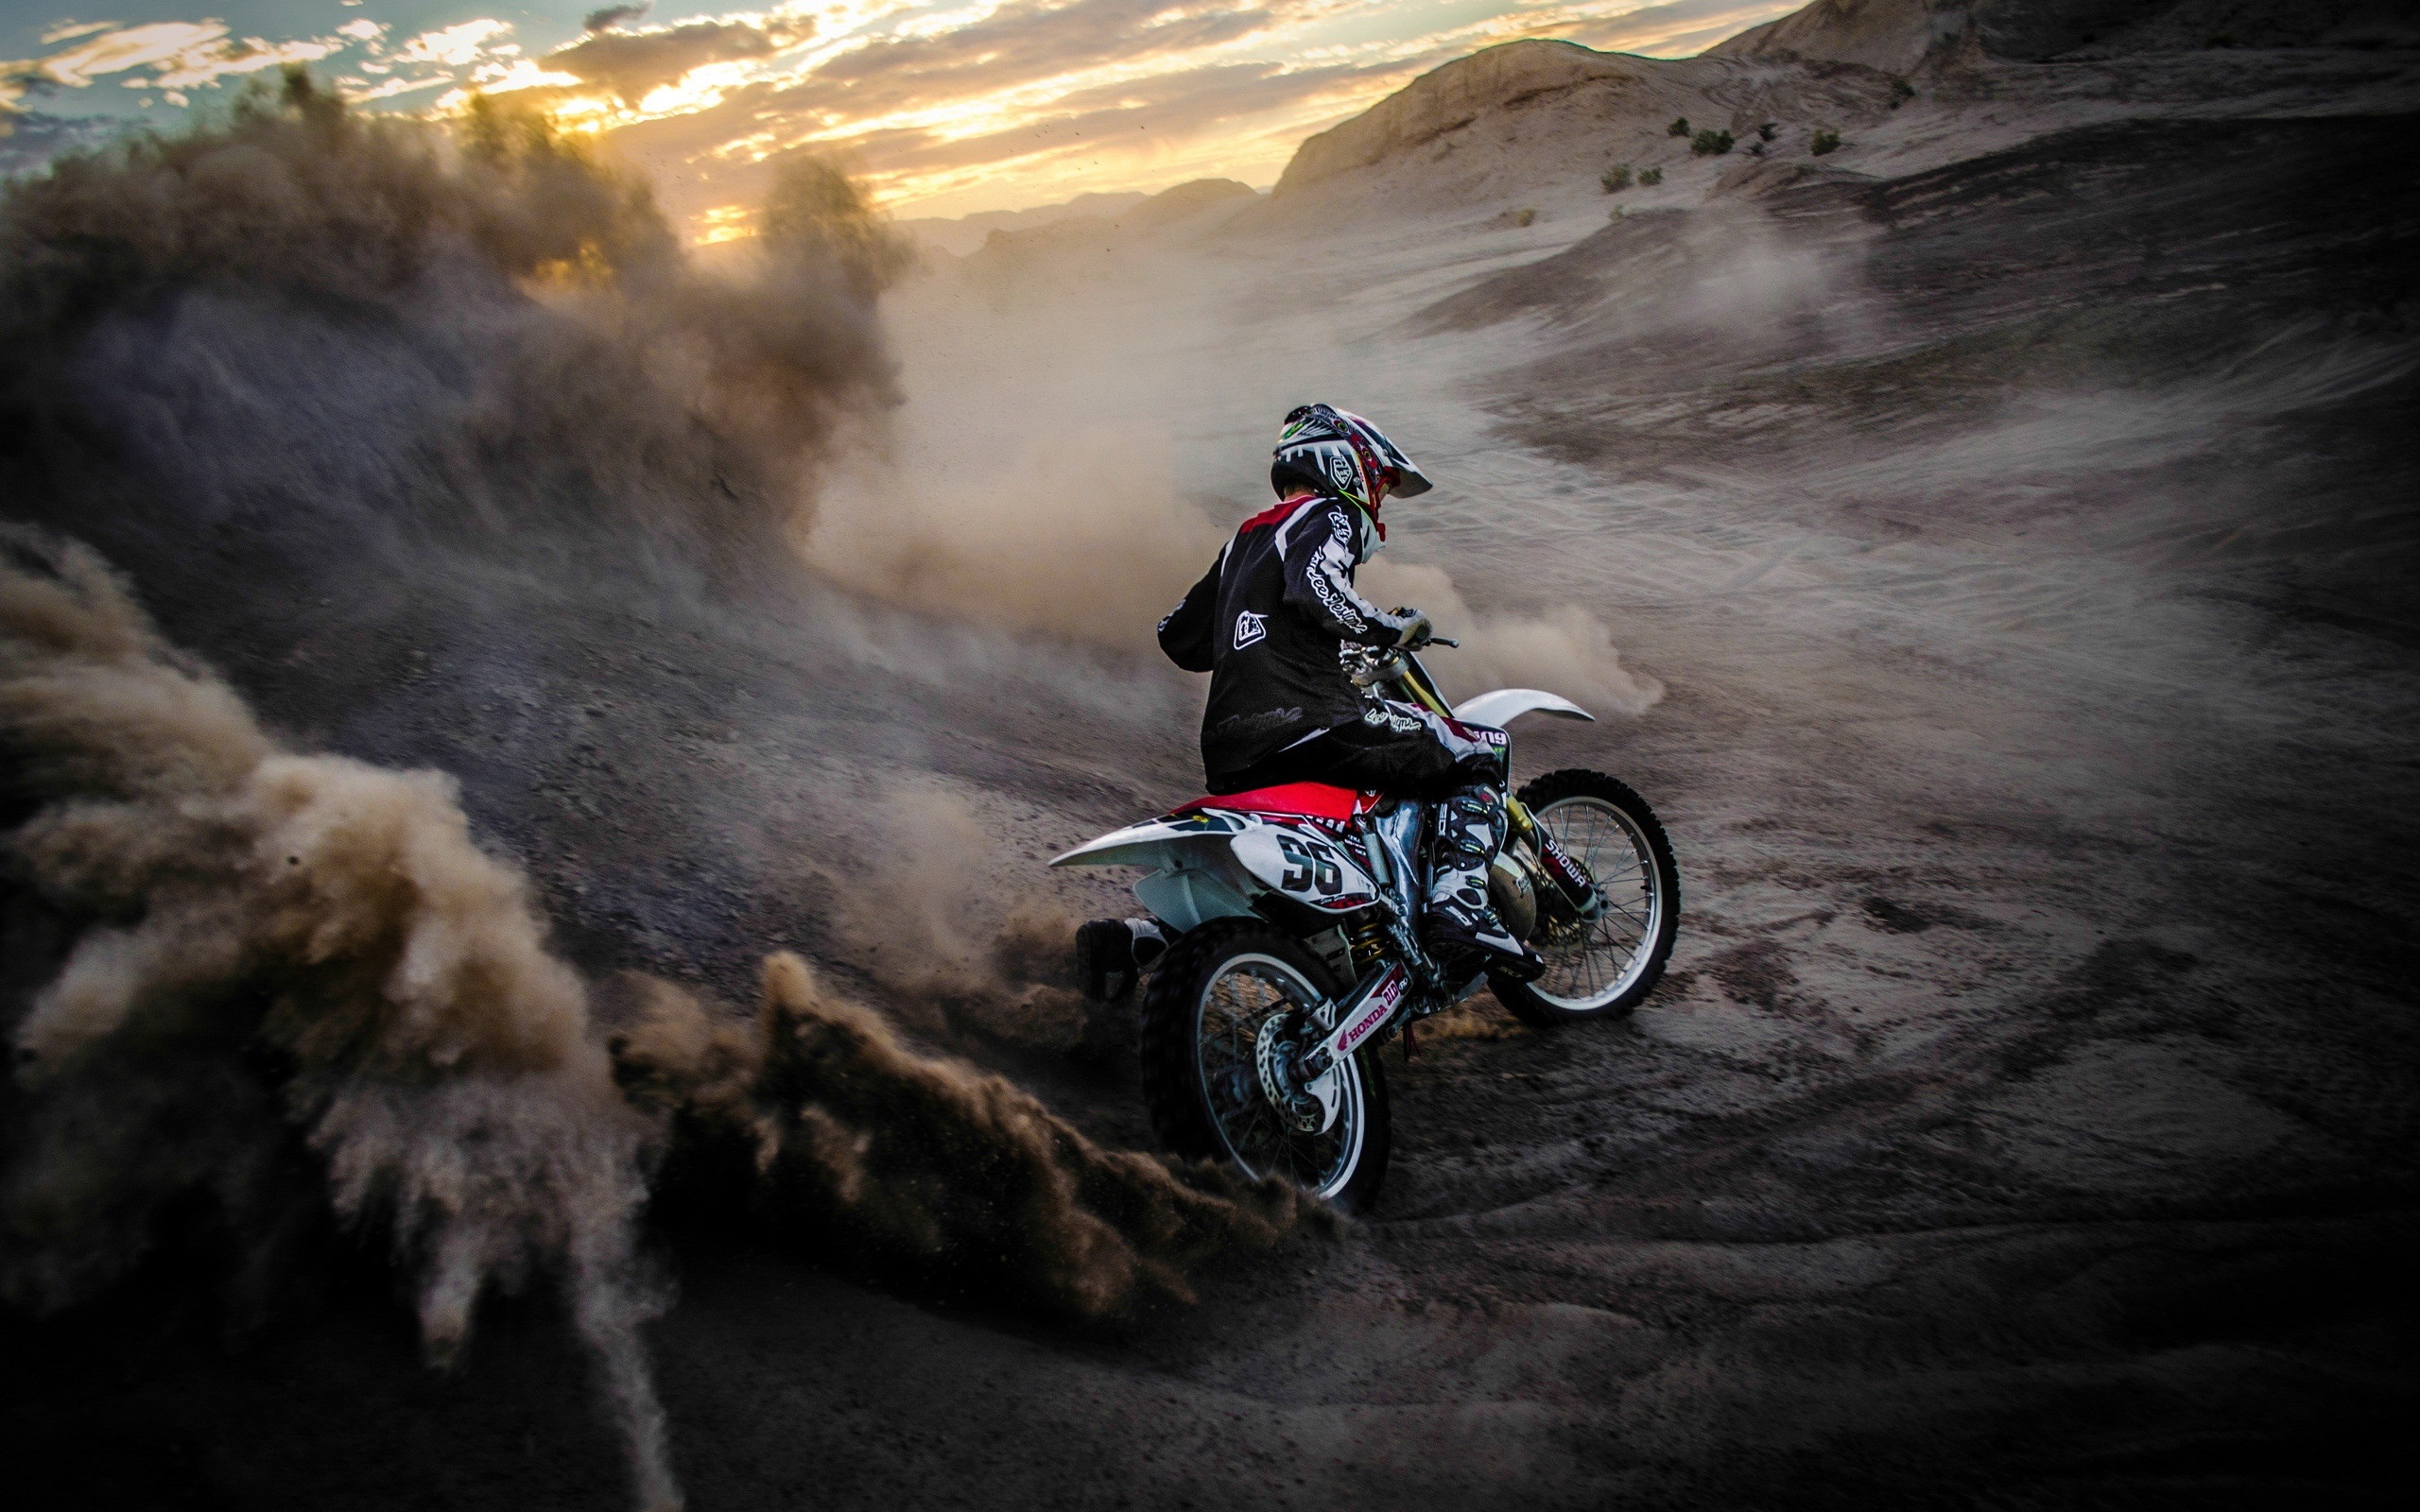 Download wallpaper for 800x600 resolution | Motorcycle race, sports, dust |  bikes and motorcycles | Wallpaper Better